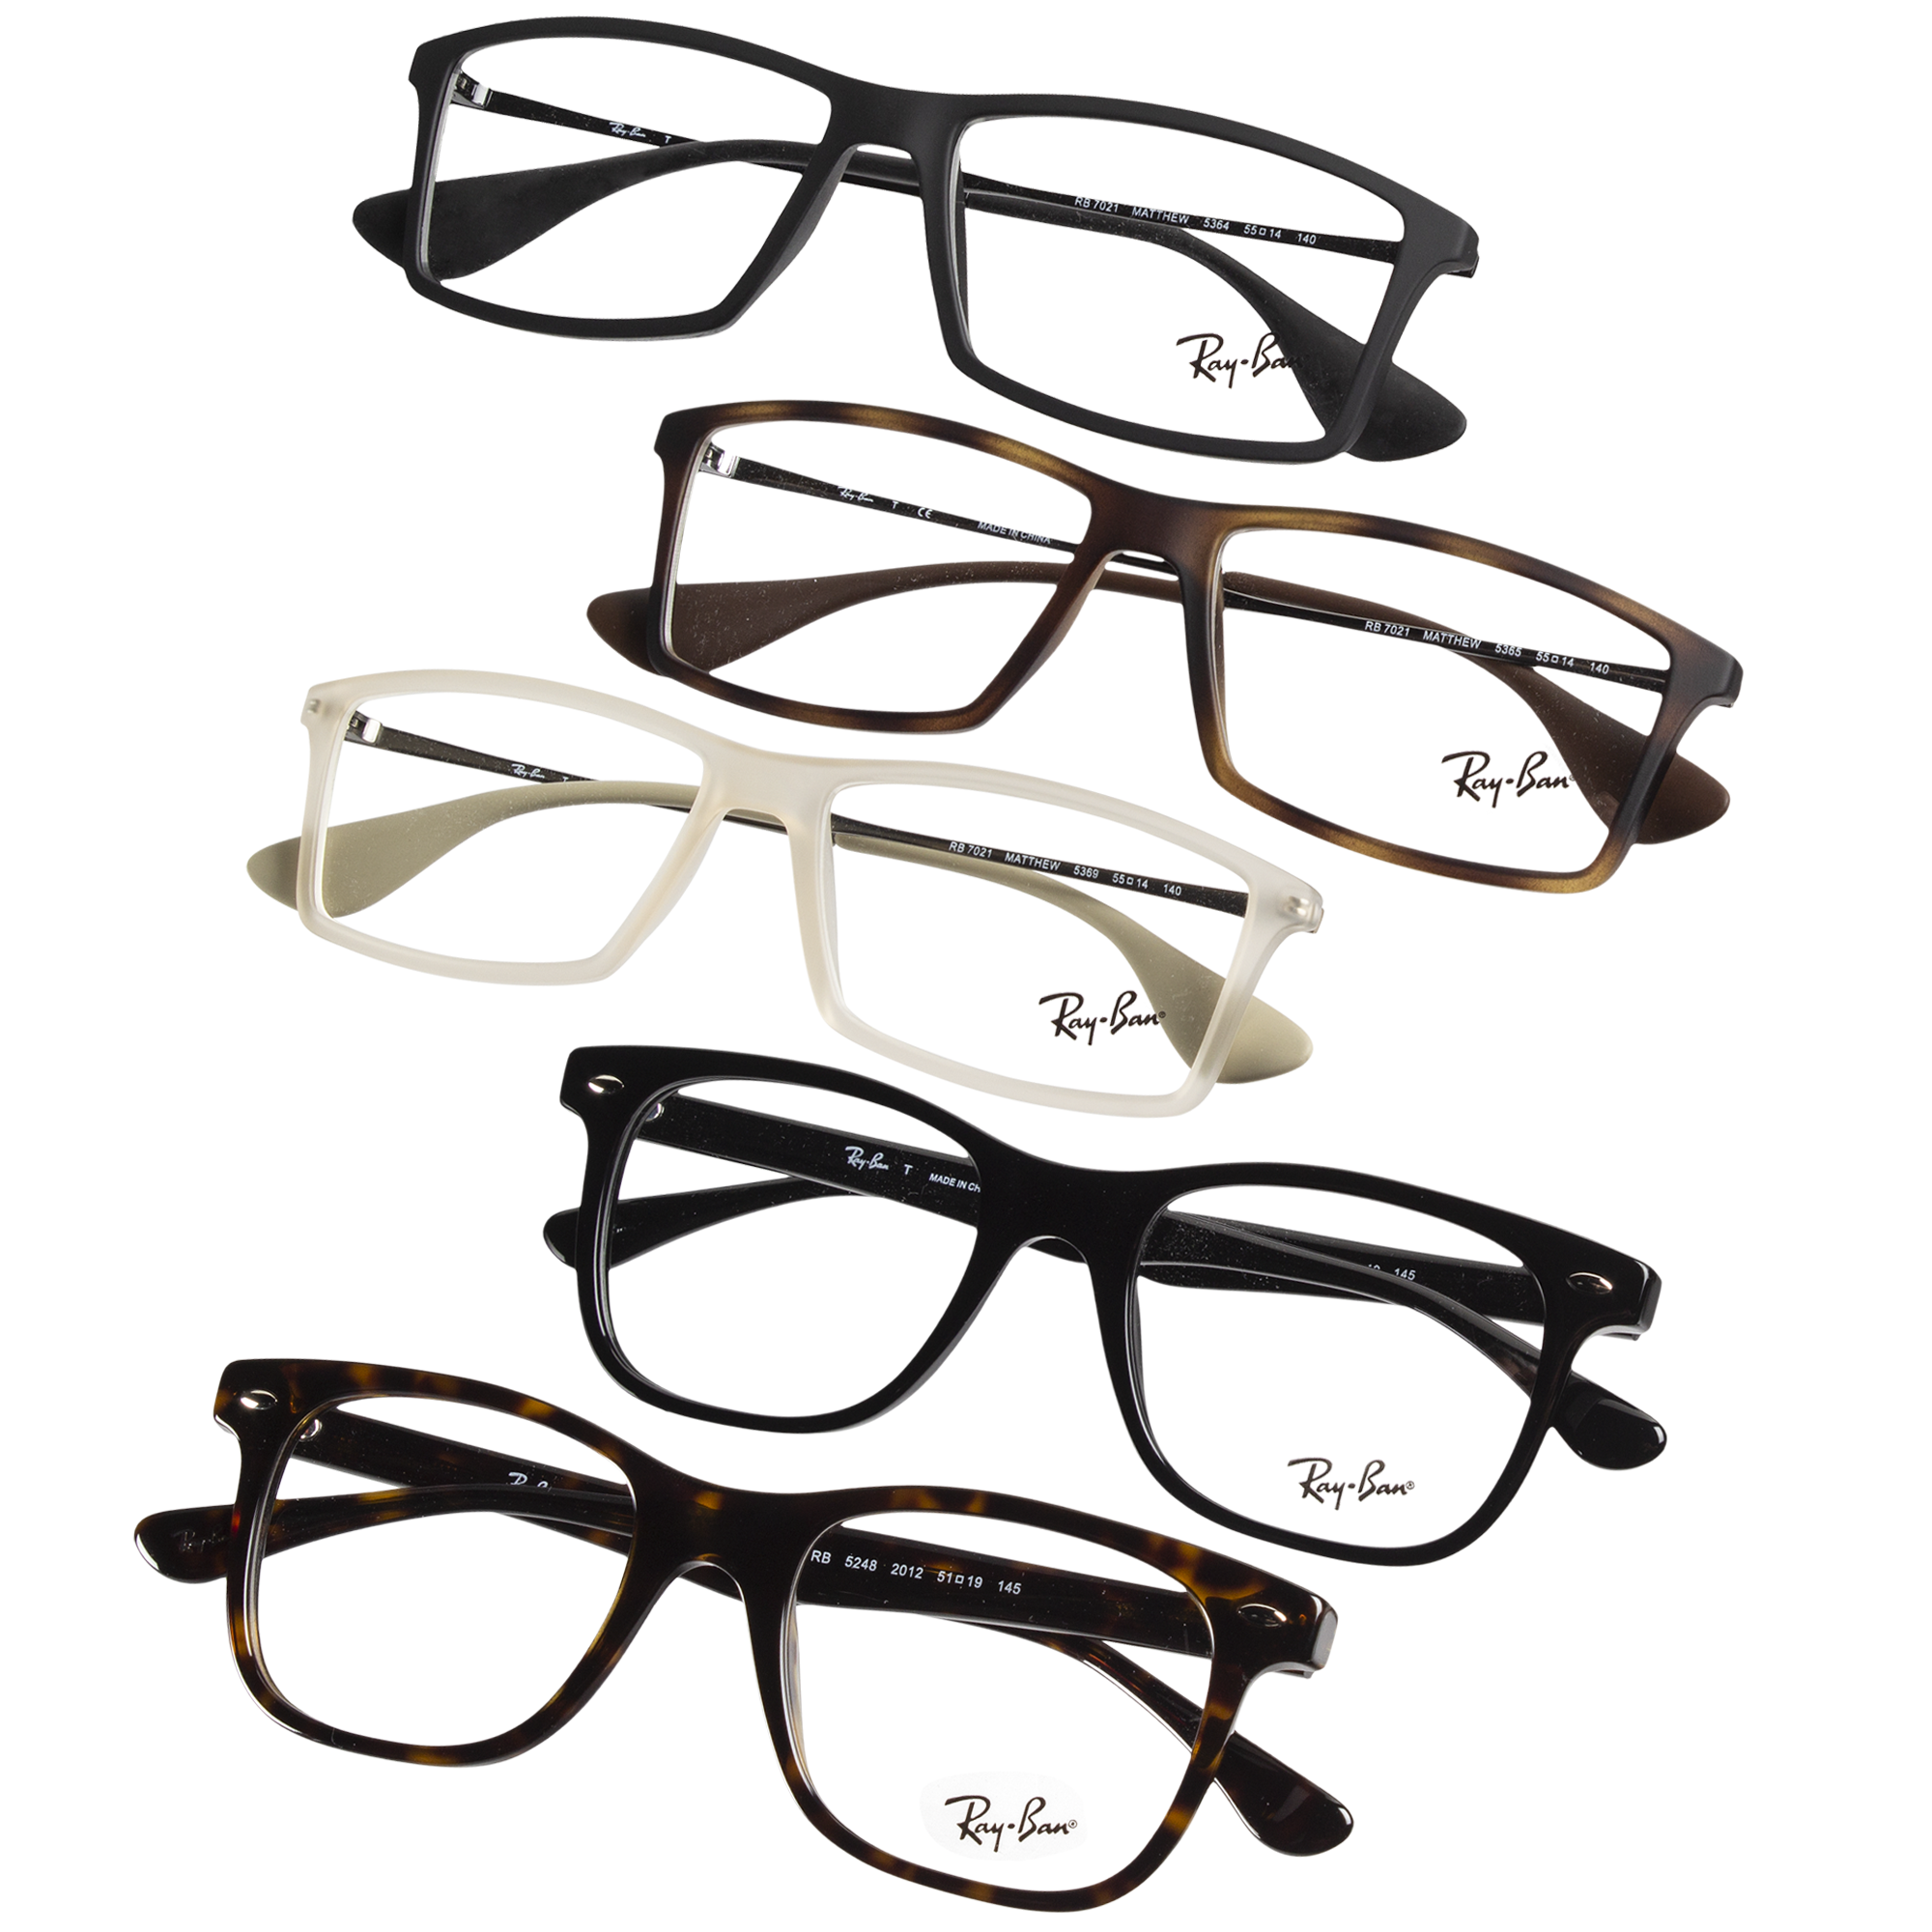 Today only: Ray-Ban eyeglasses for $29 shipped